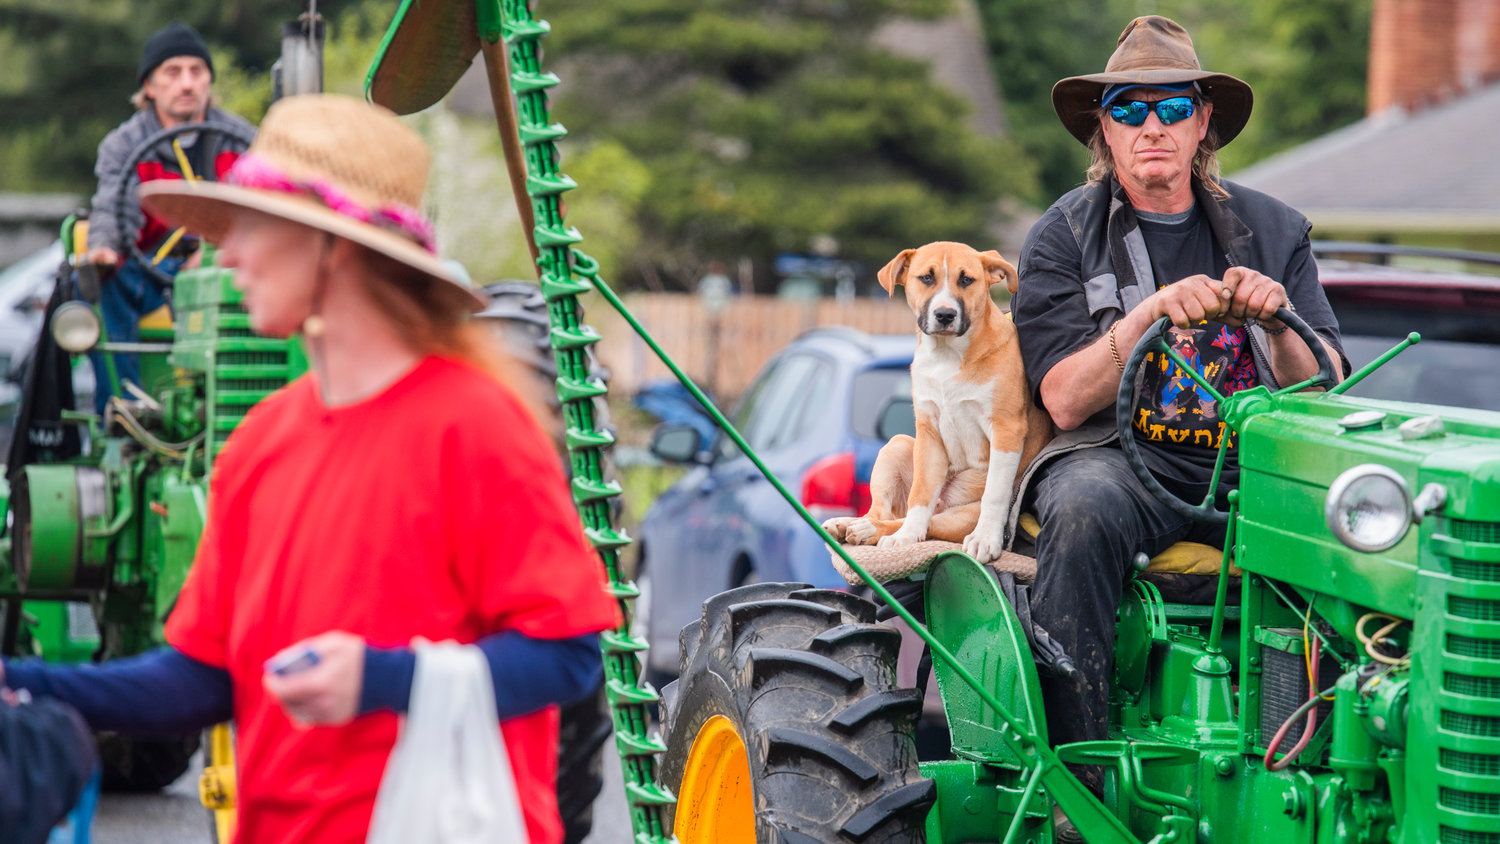 Jerry Andersen rides alongside Razz, his Pitbull-Heeler, while atop a John Deere tractor during the Vader May Day Parade Saturday morning.